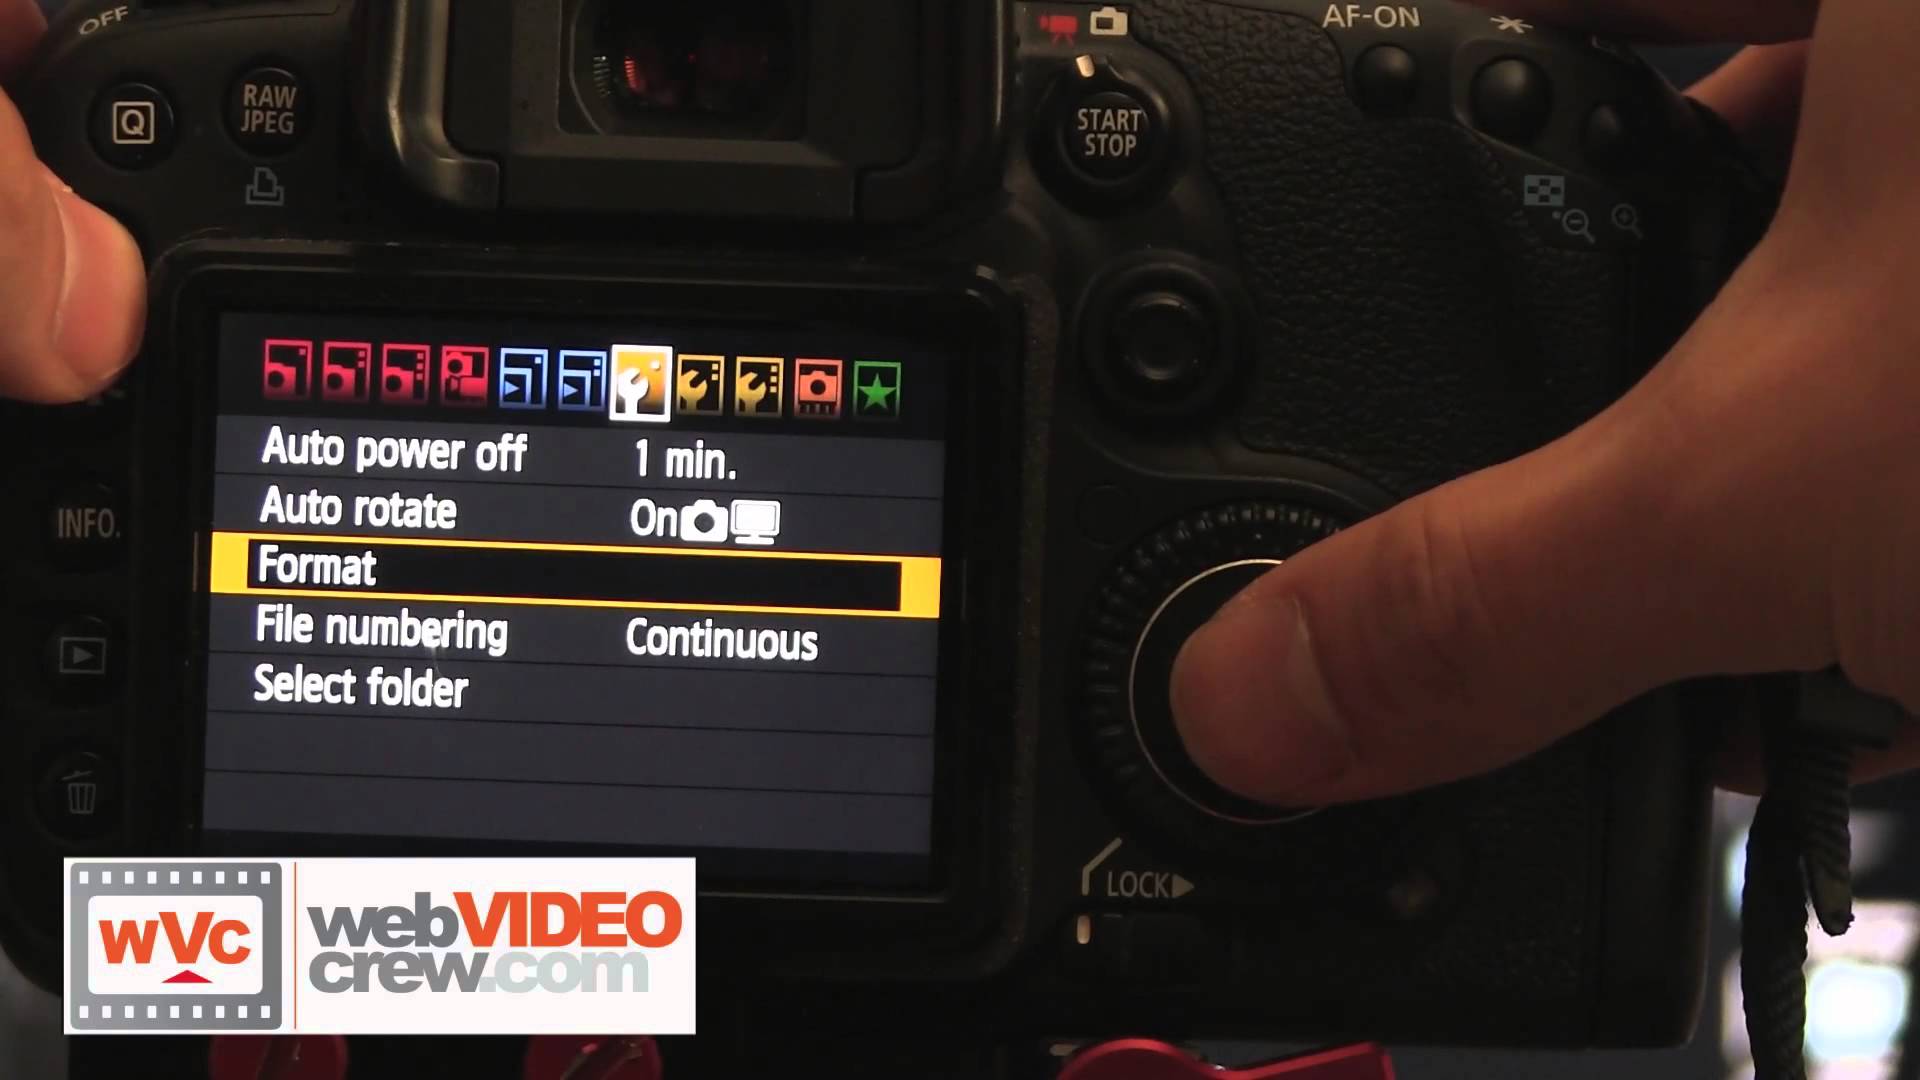 Formatting a Compact Flash (CF) Card to Use in DSLR Camera – Video Production Tips by Web Video Crew